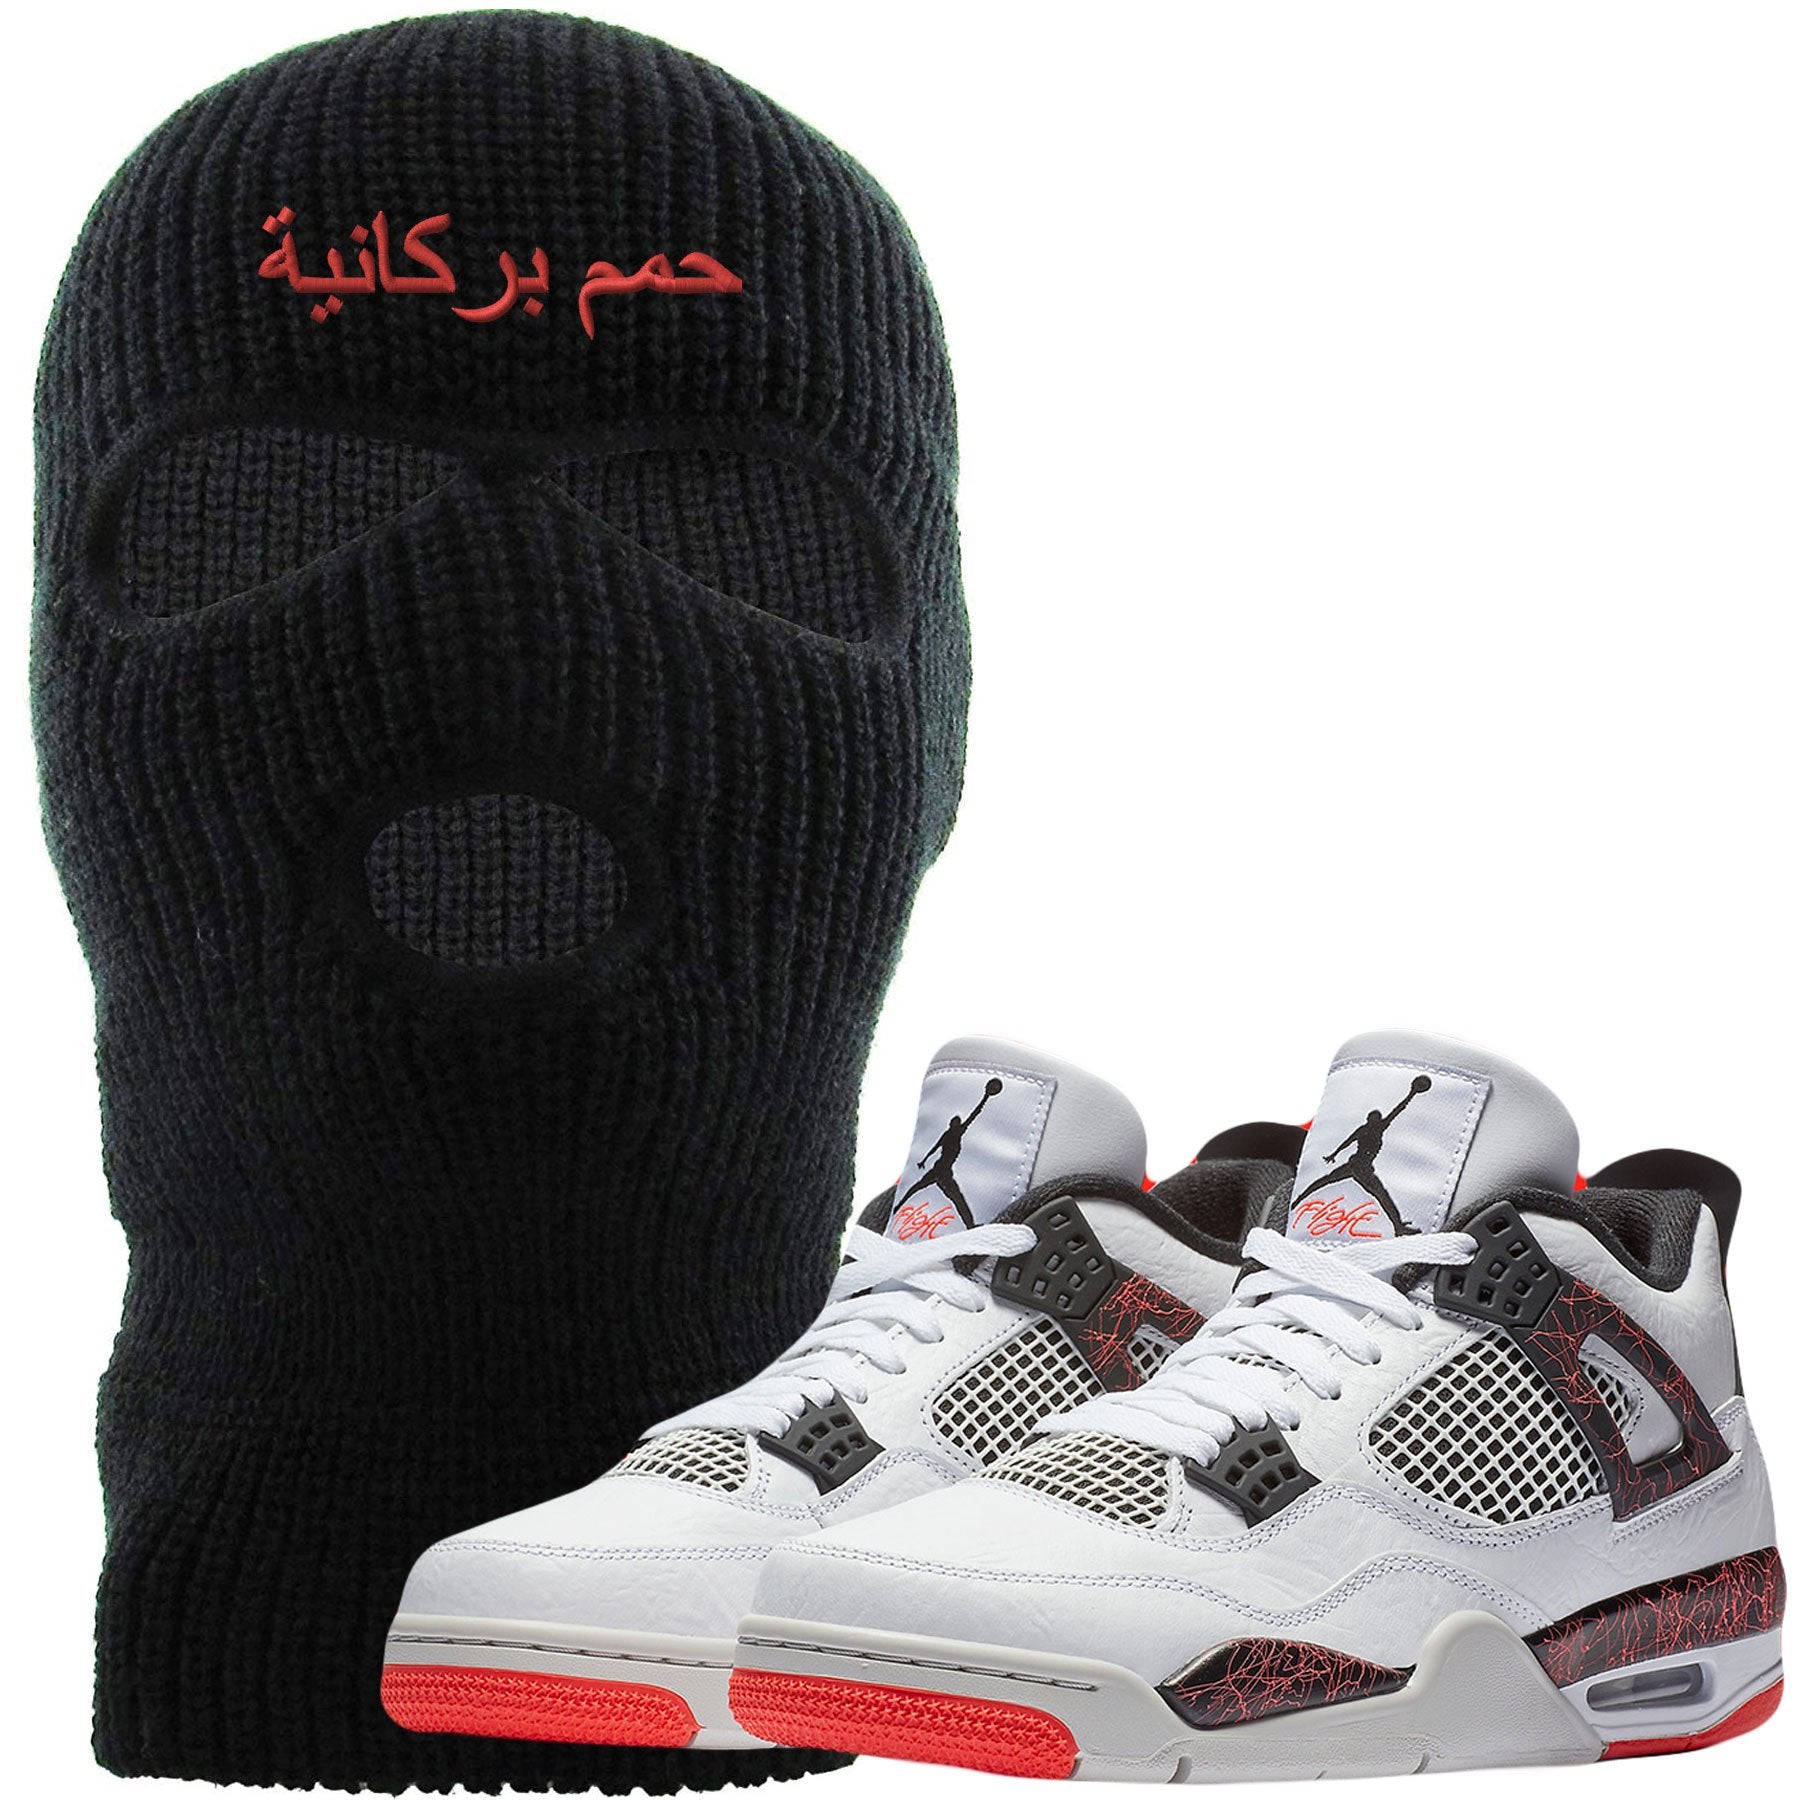 Match your pair of Jordan 4 Pale Citron "Hot Lava 4s" sneakers with this sneaker matching ski mask